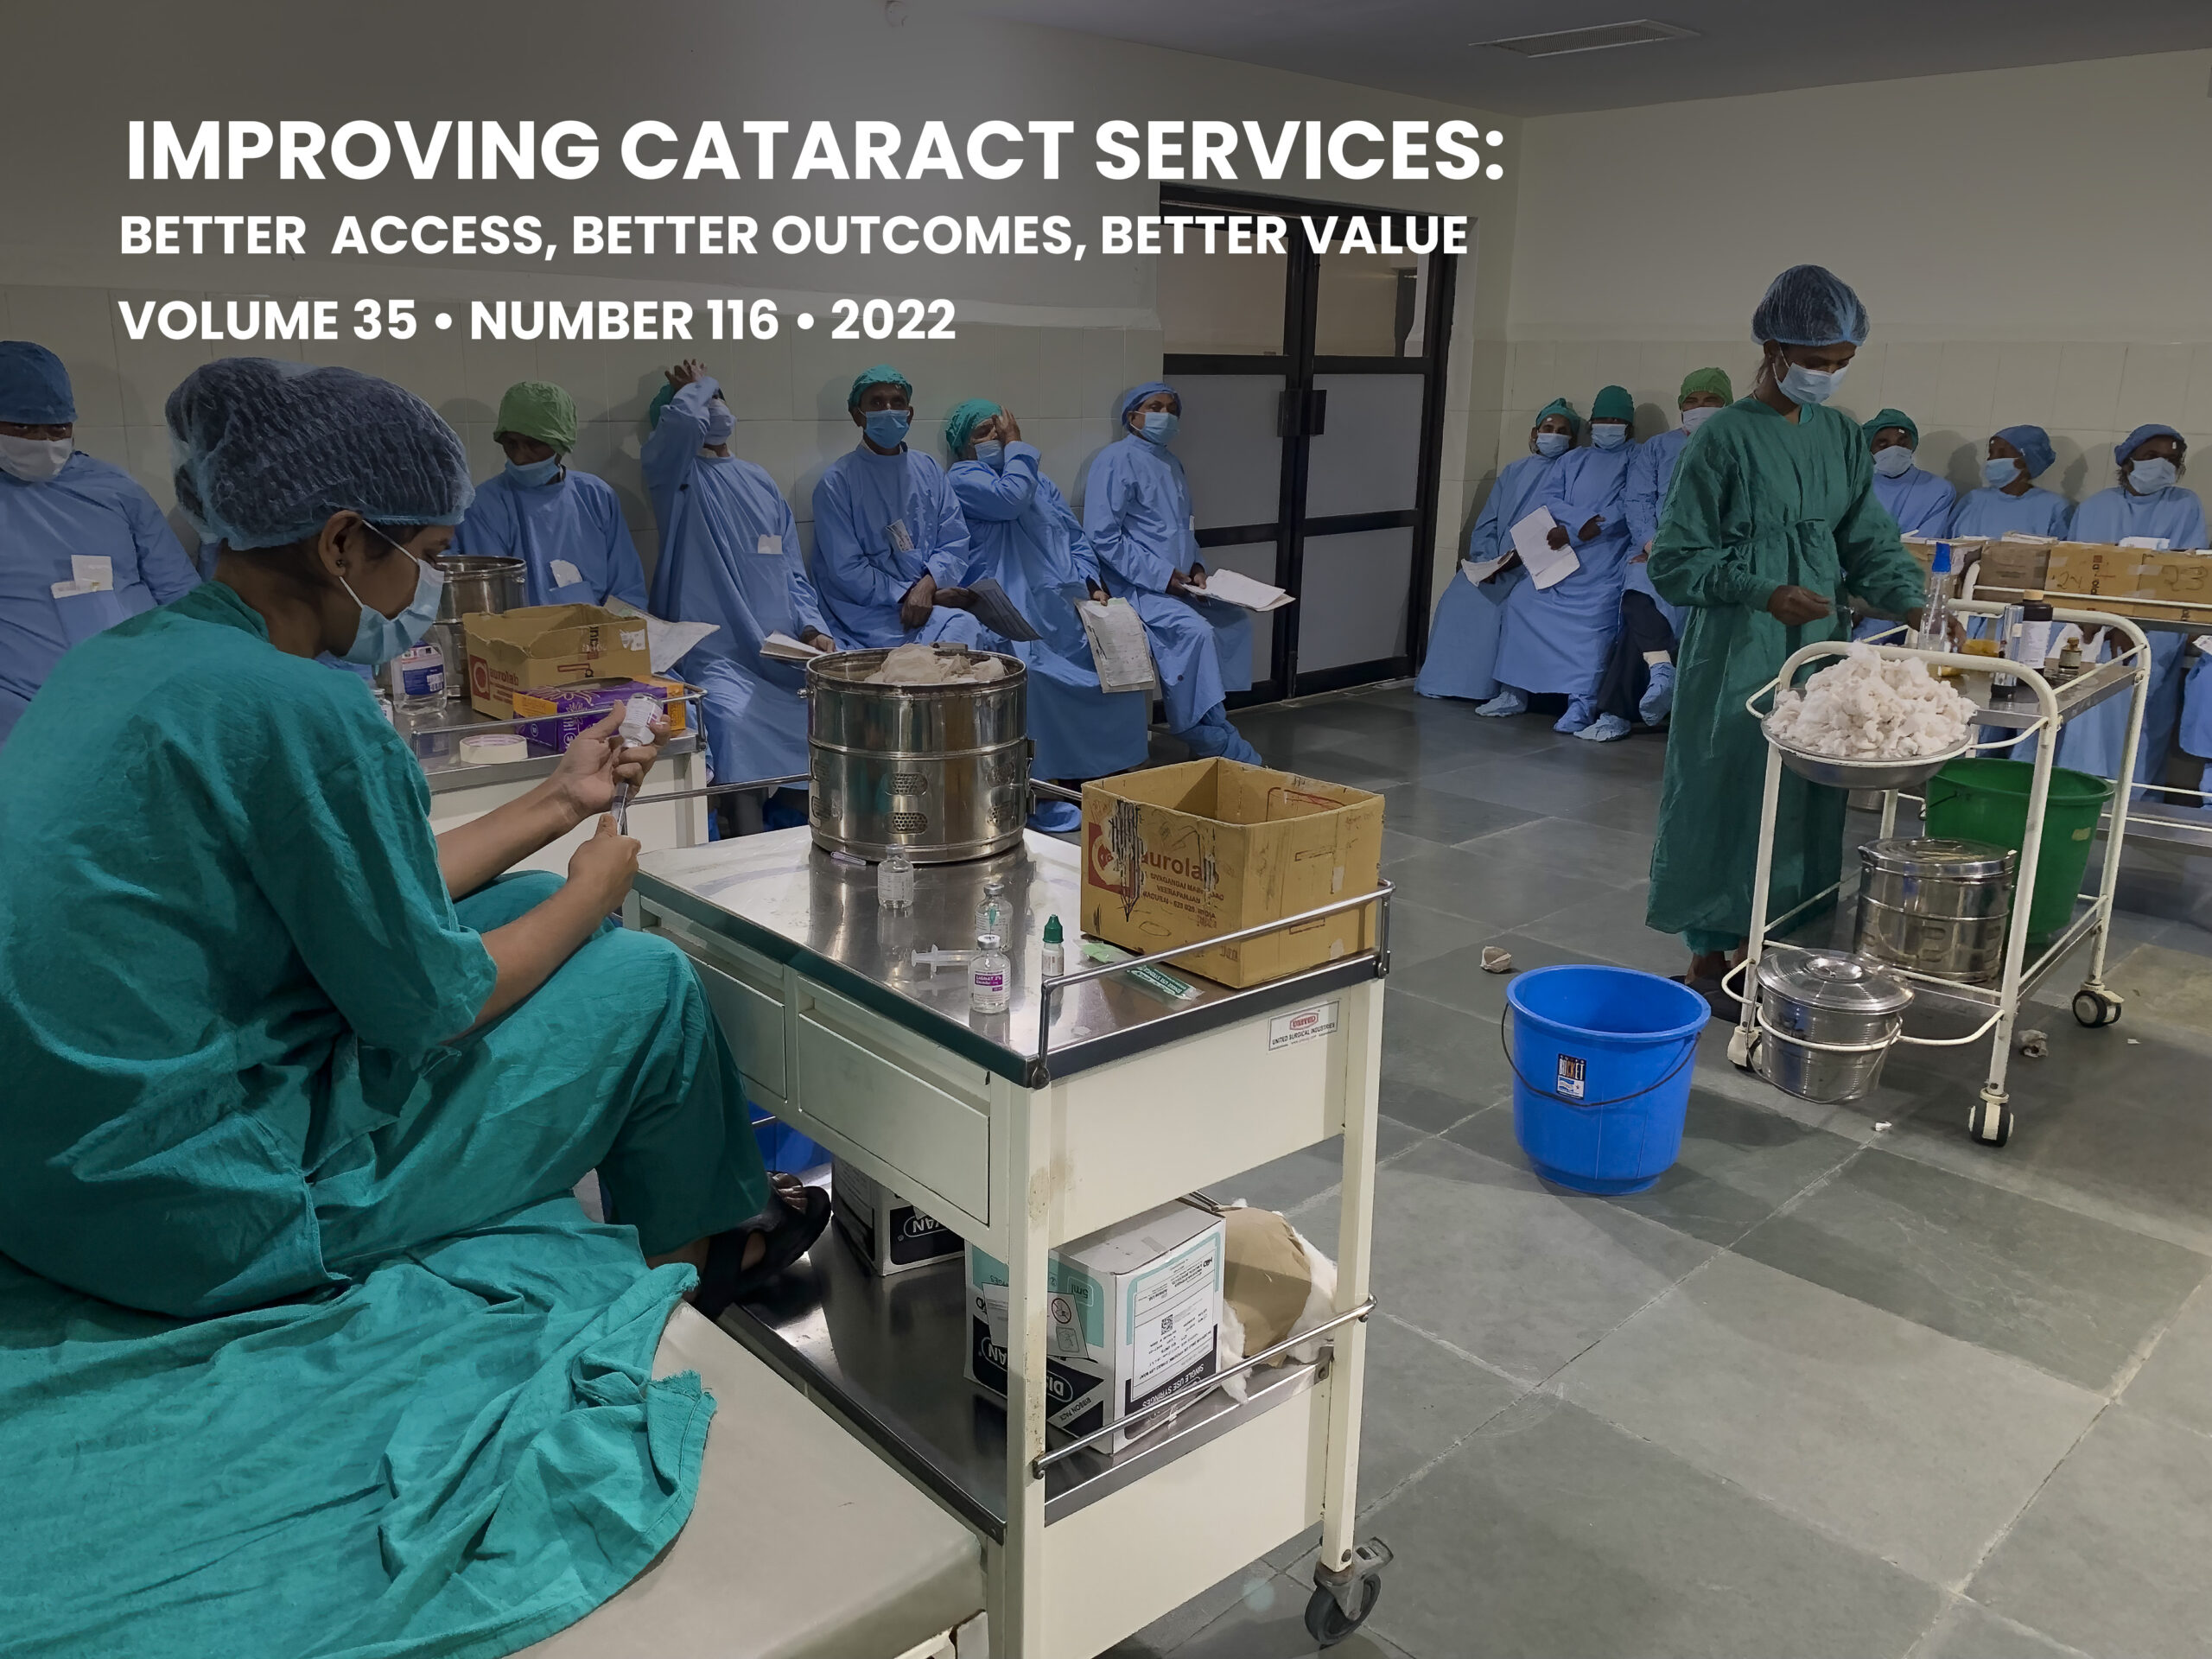 Improving cataract services: better access, better outcomes, better value